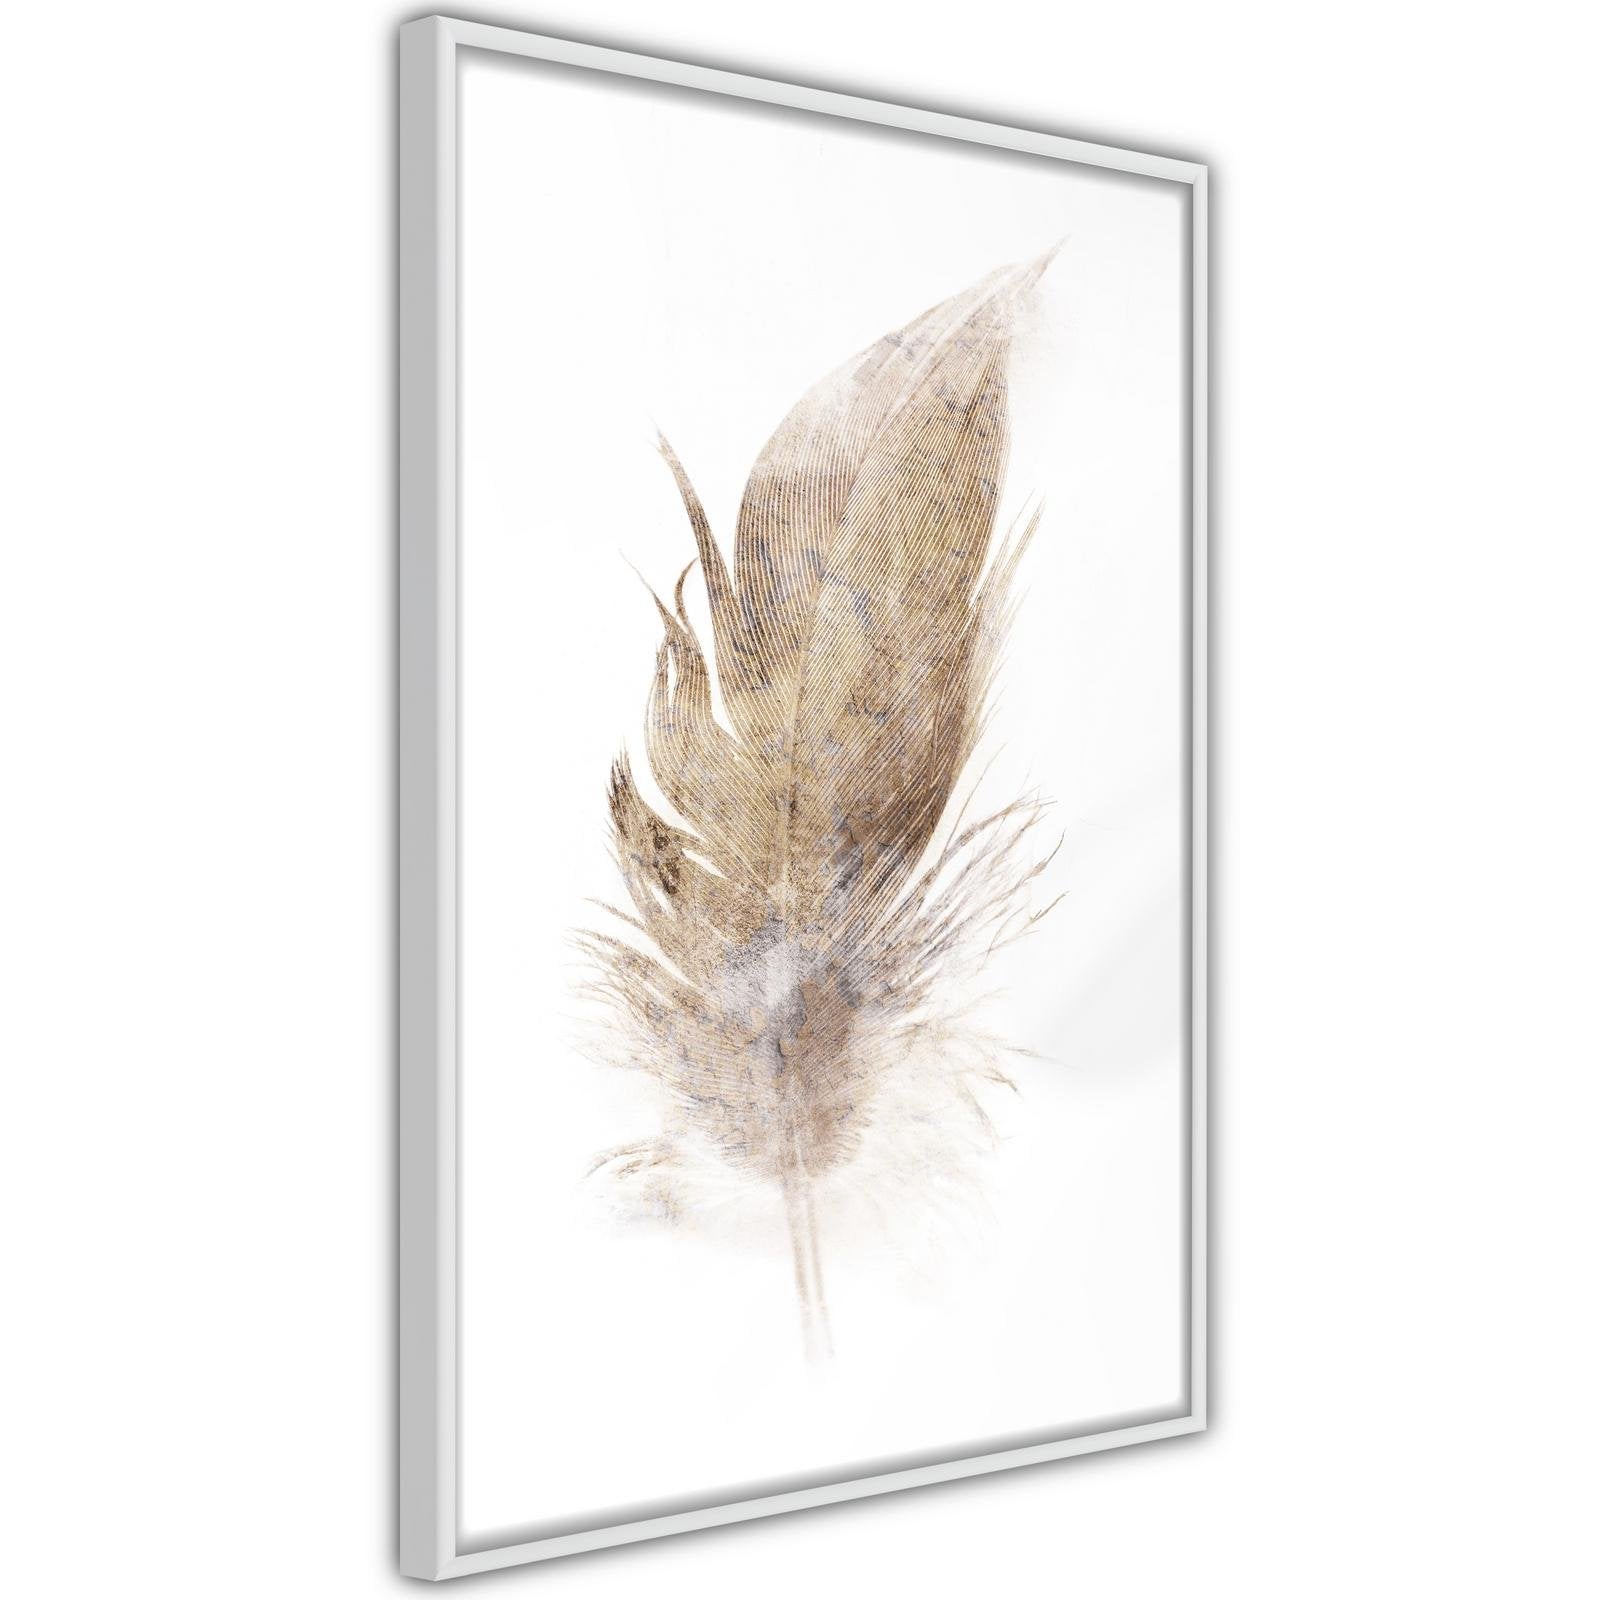 Inramad Poster / Tavla - Lost Feather (Beige)-Poster Inramad-Artgeist-peaceofhome.se